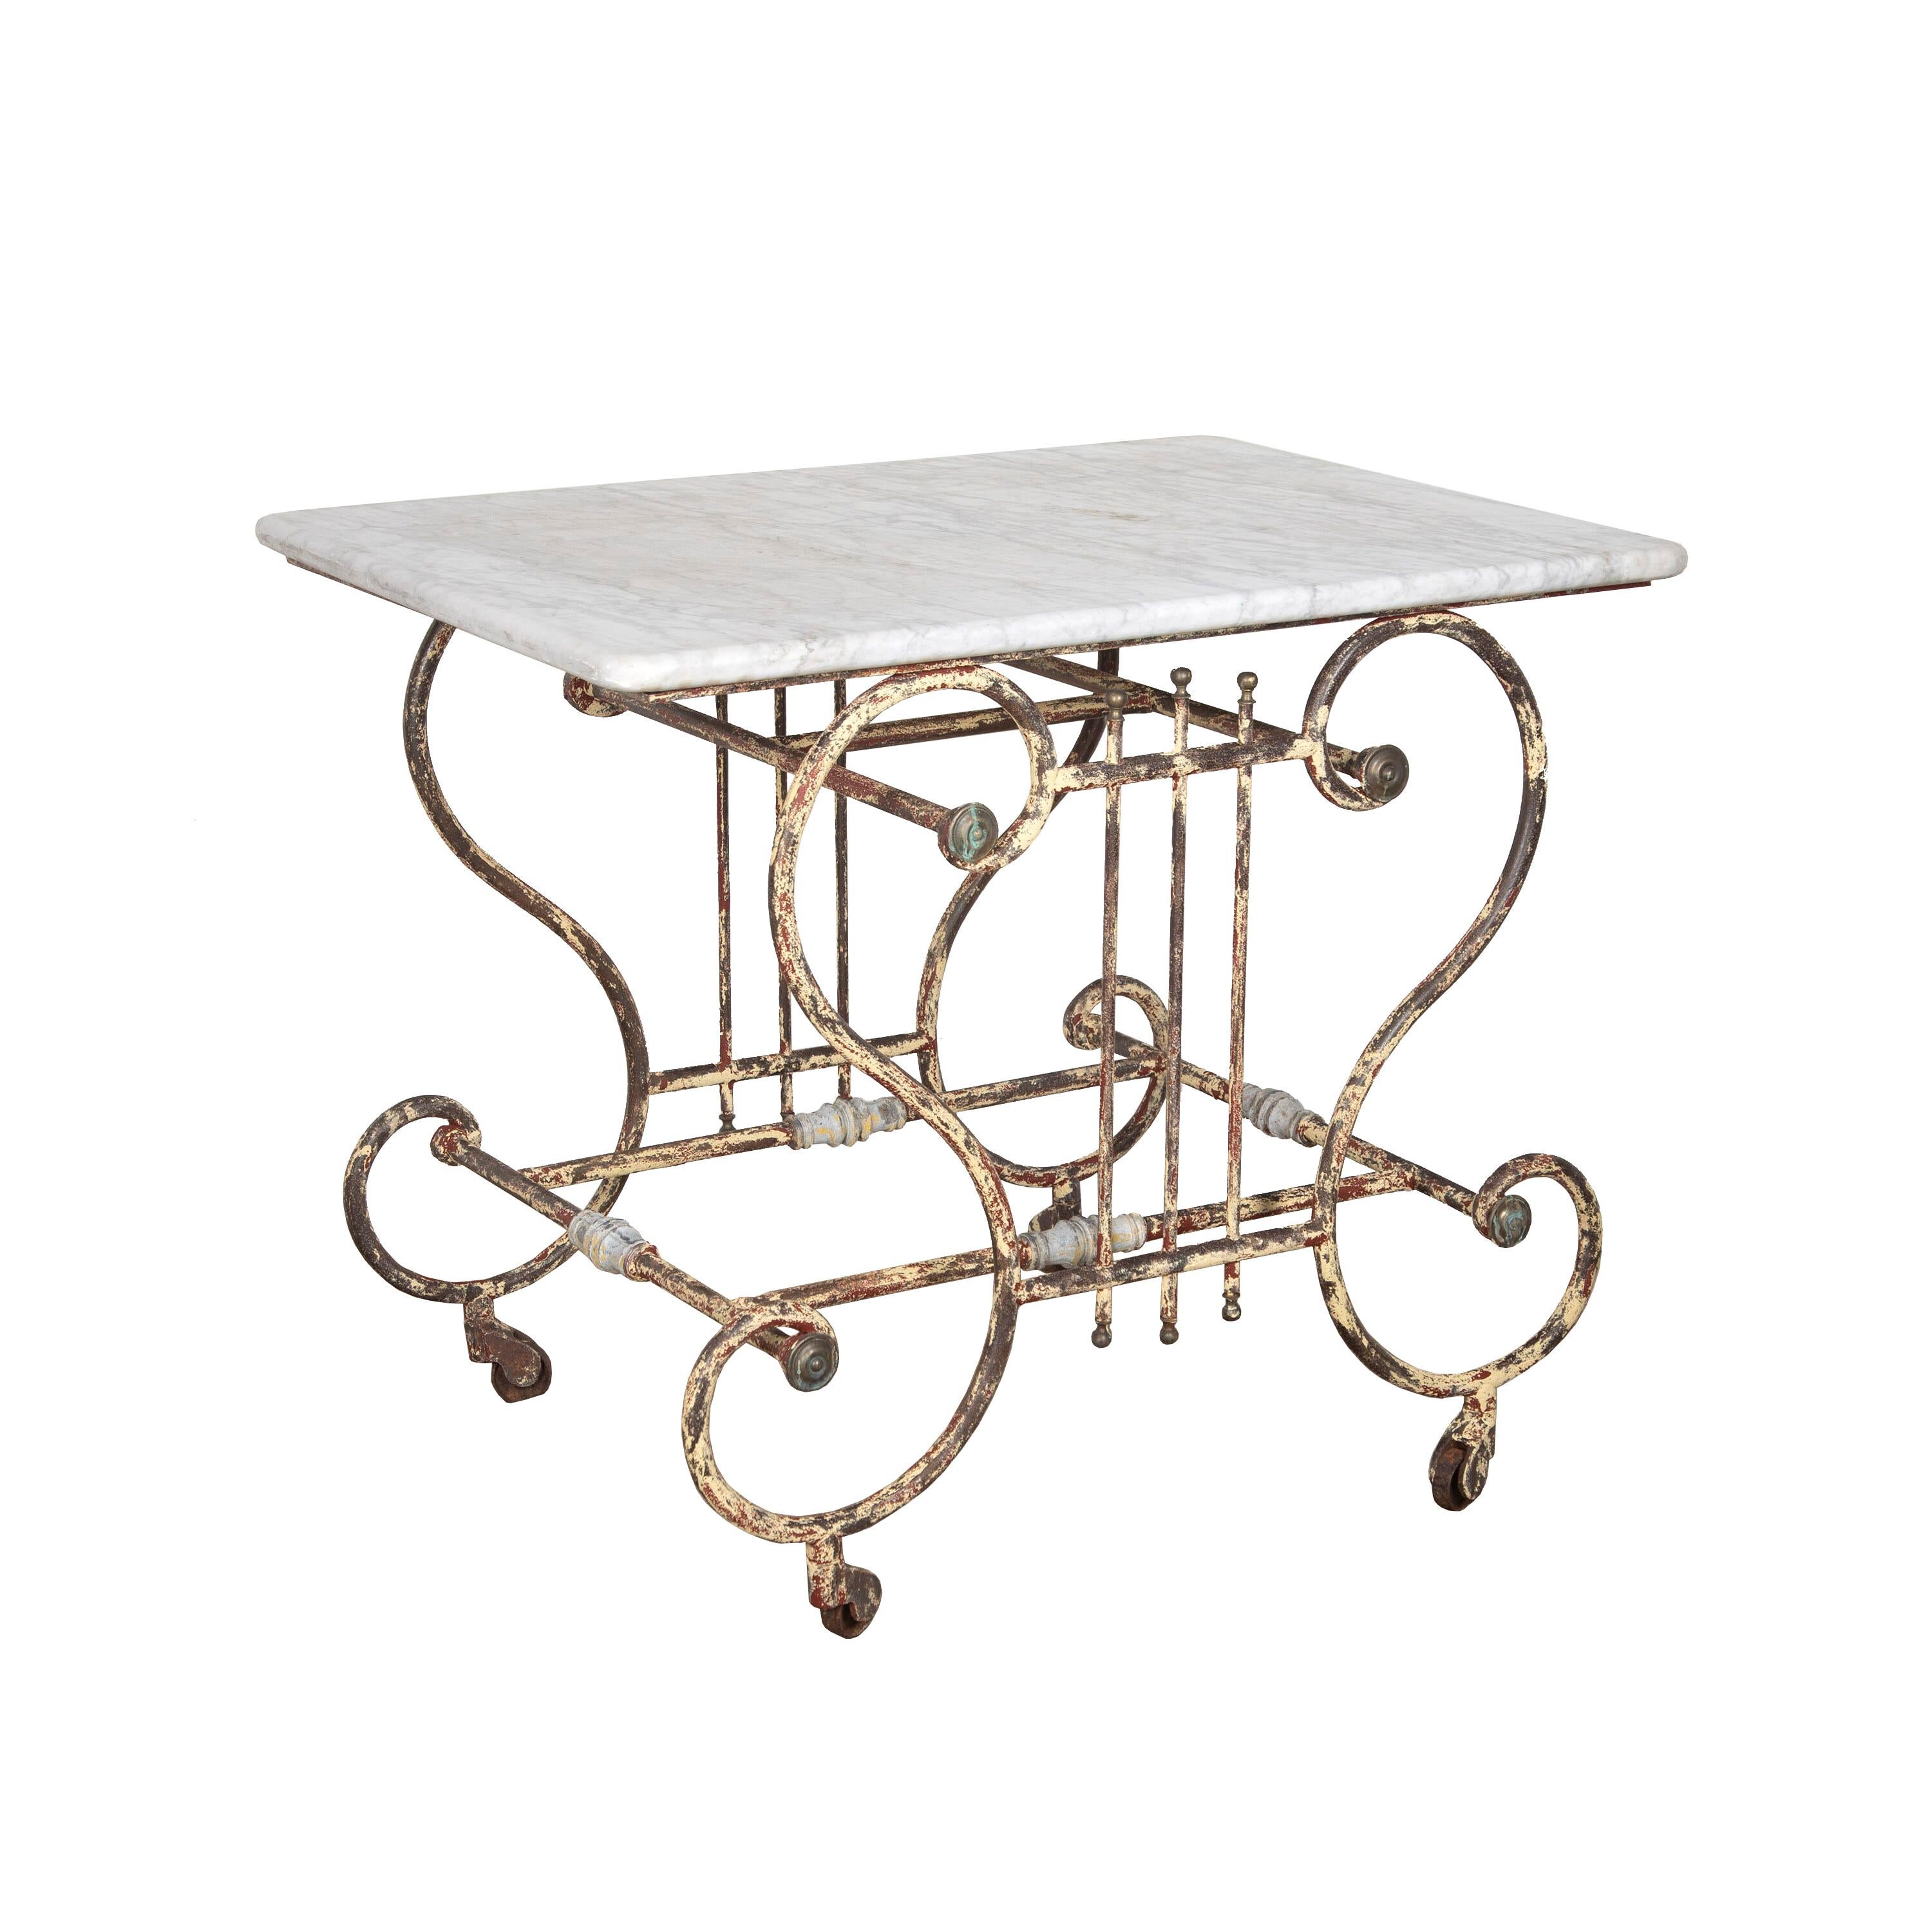 French 19th Century Swedish Patisserie Table For Sale